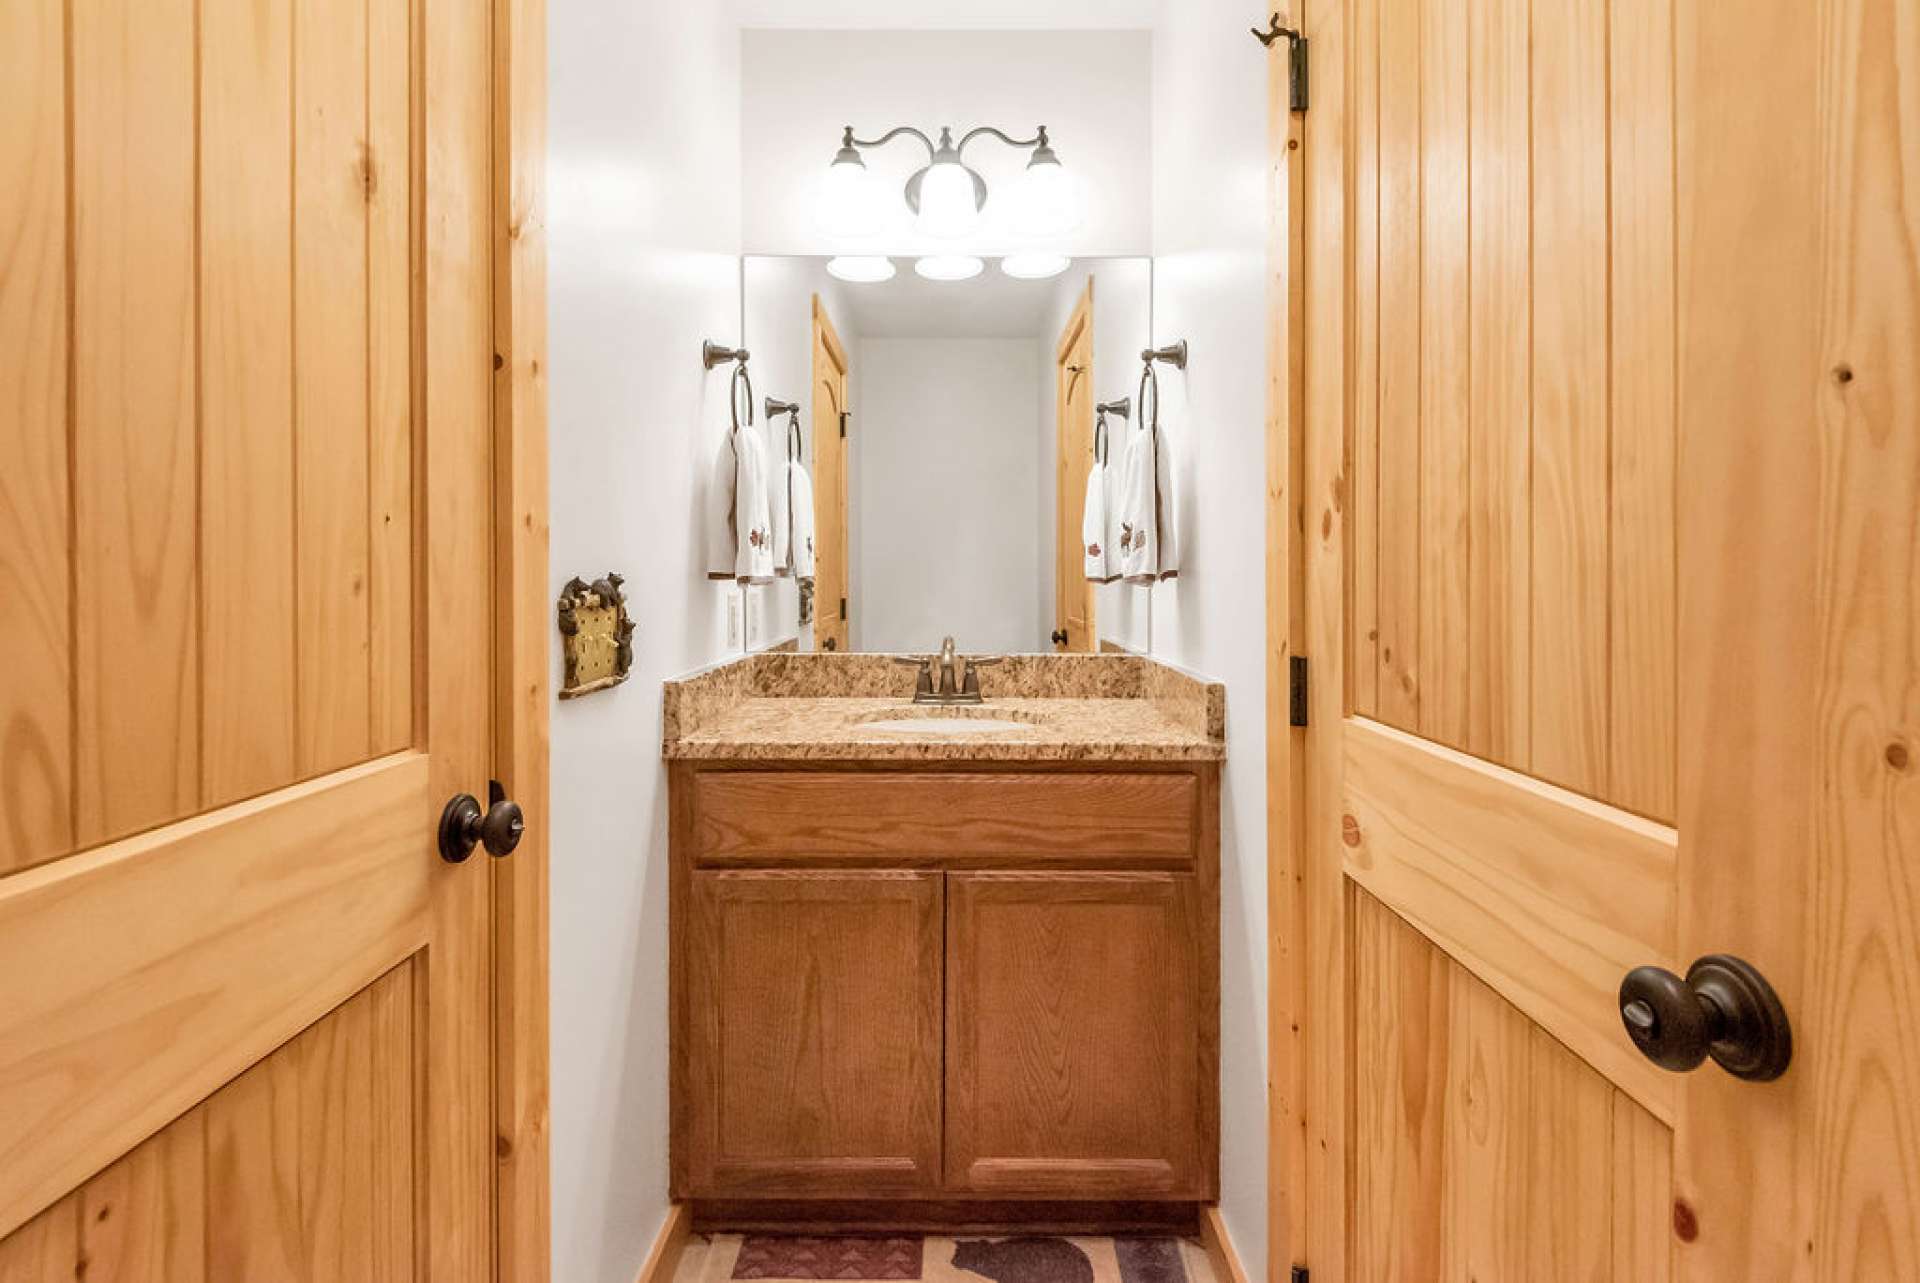 Half bath can be accessed from the laundry room or hallway.